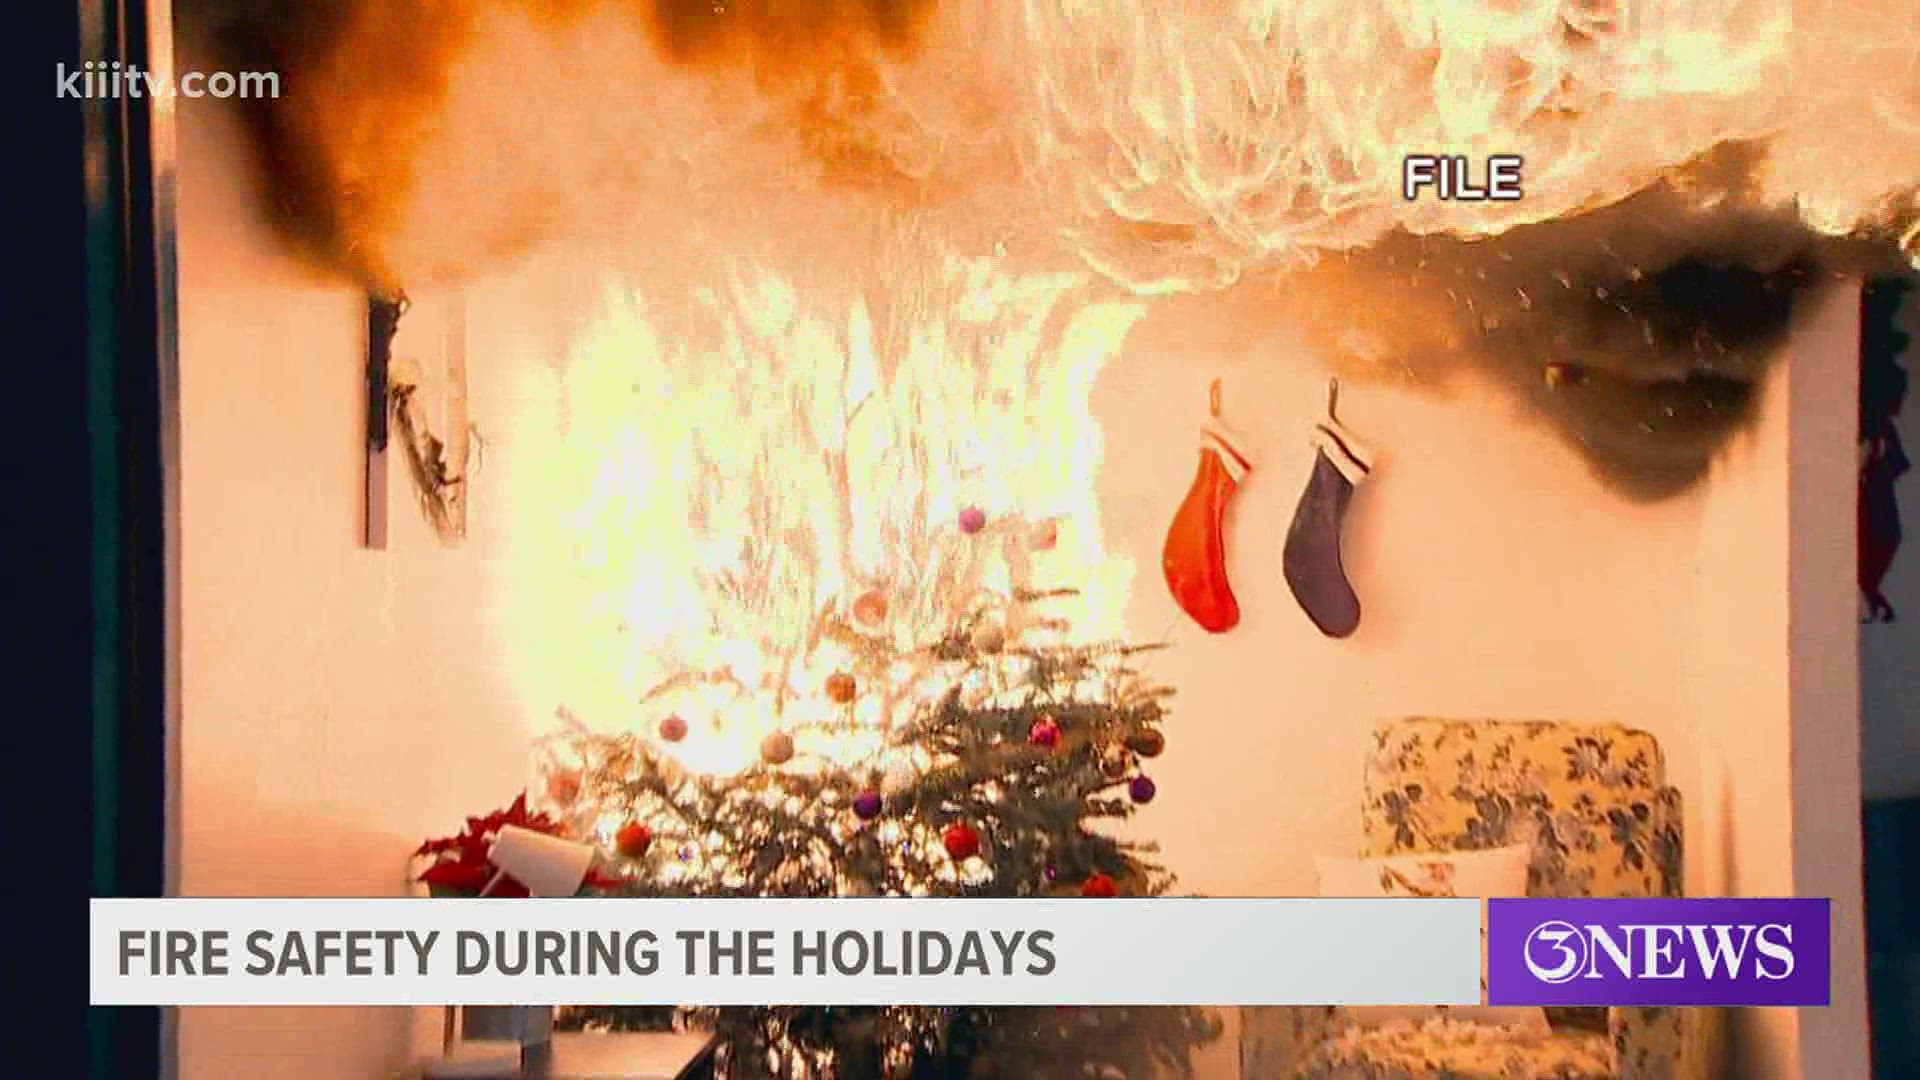 The colder temperatures and holiday season are known to pose a risk for increased fire danger around the house.